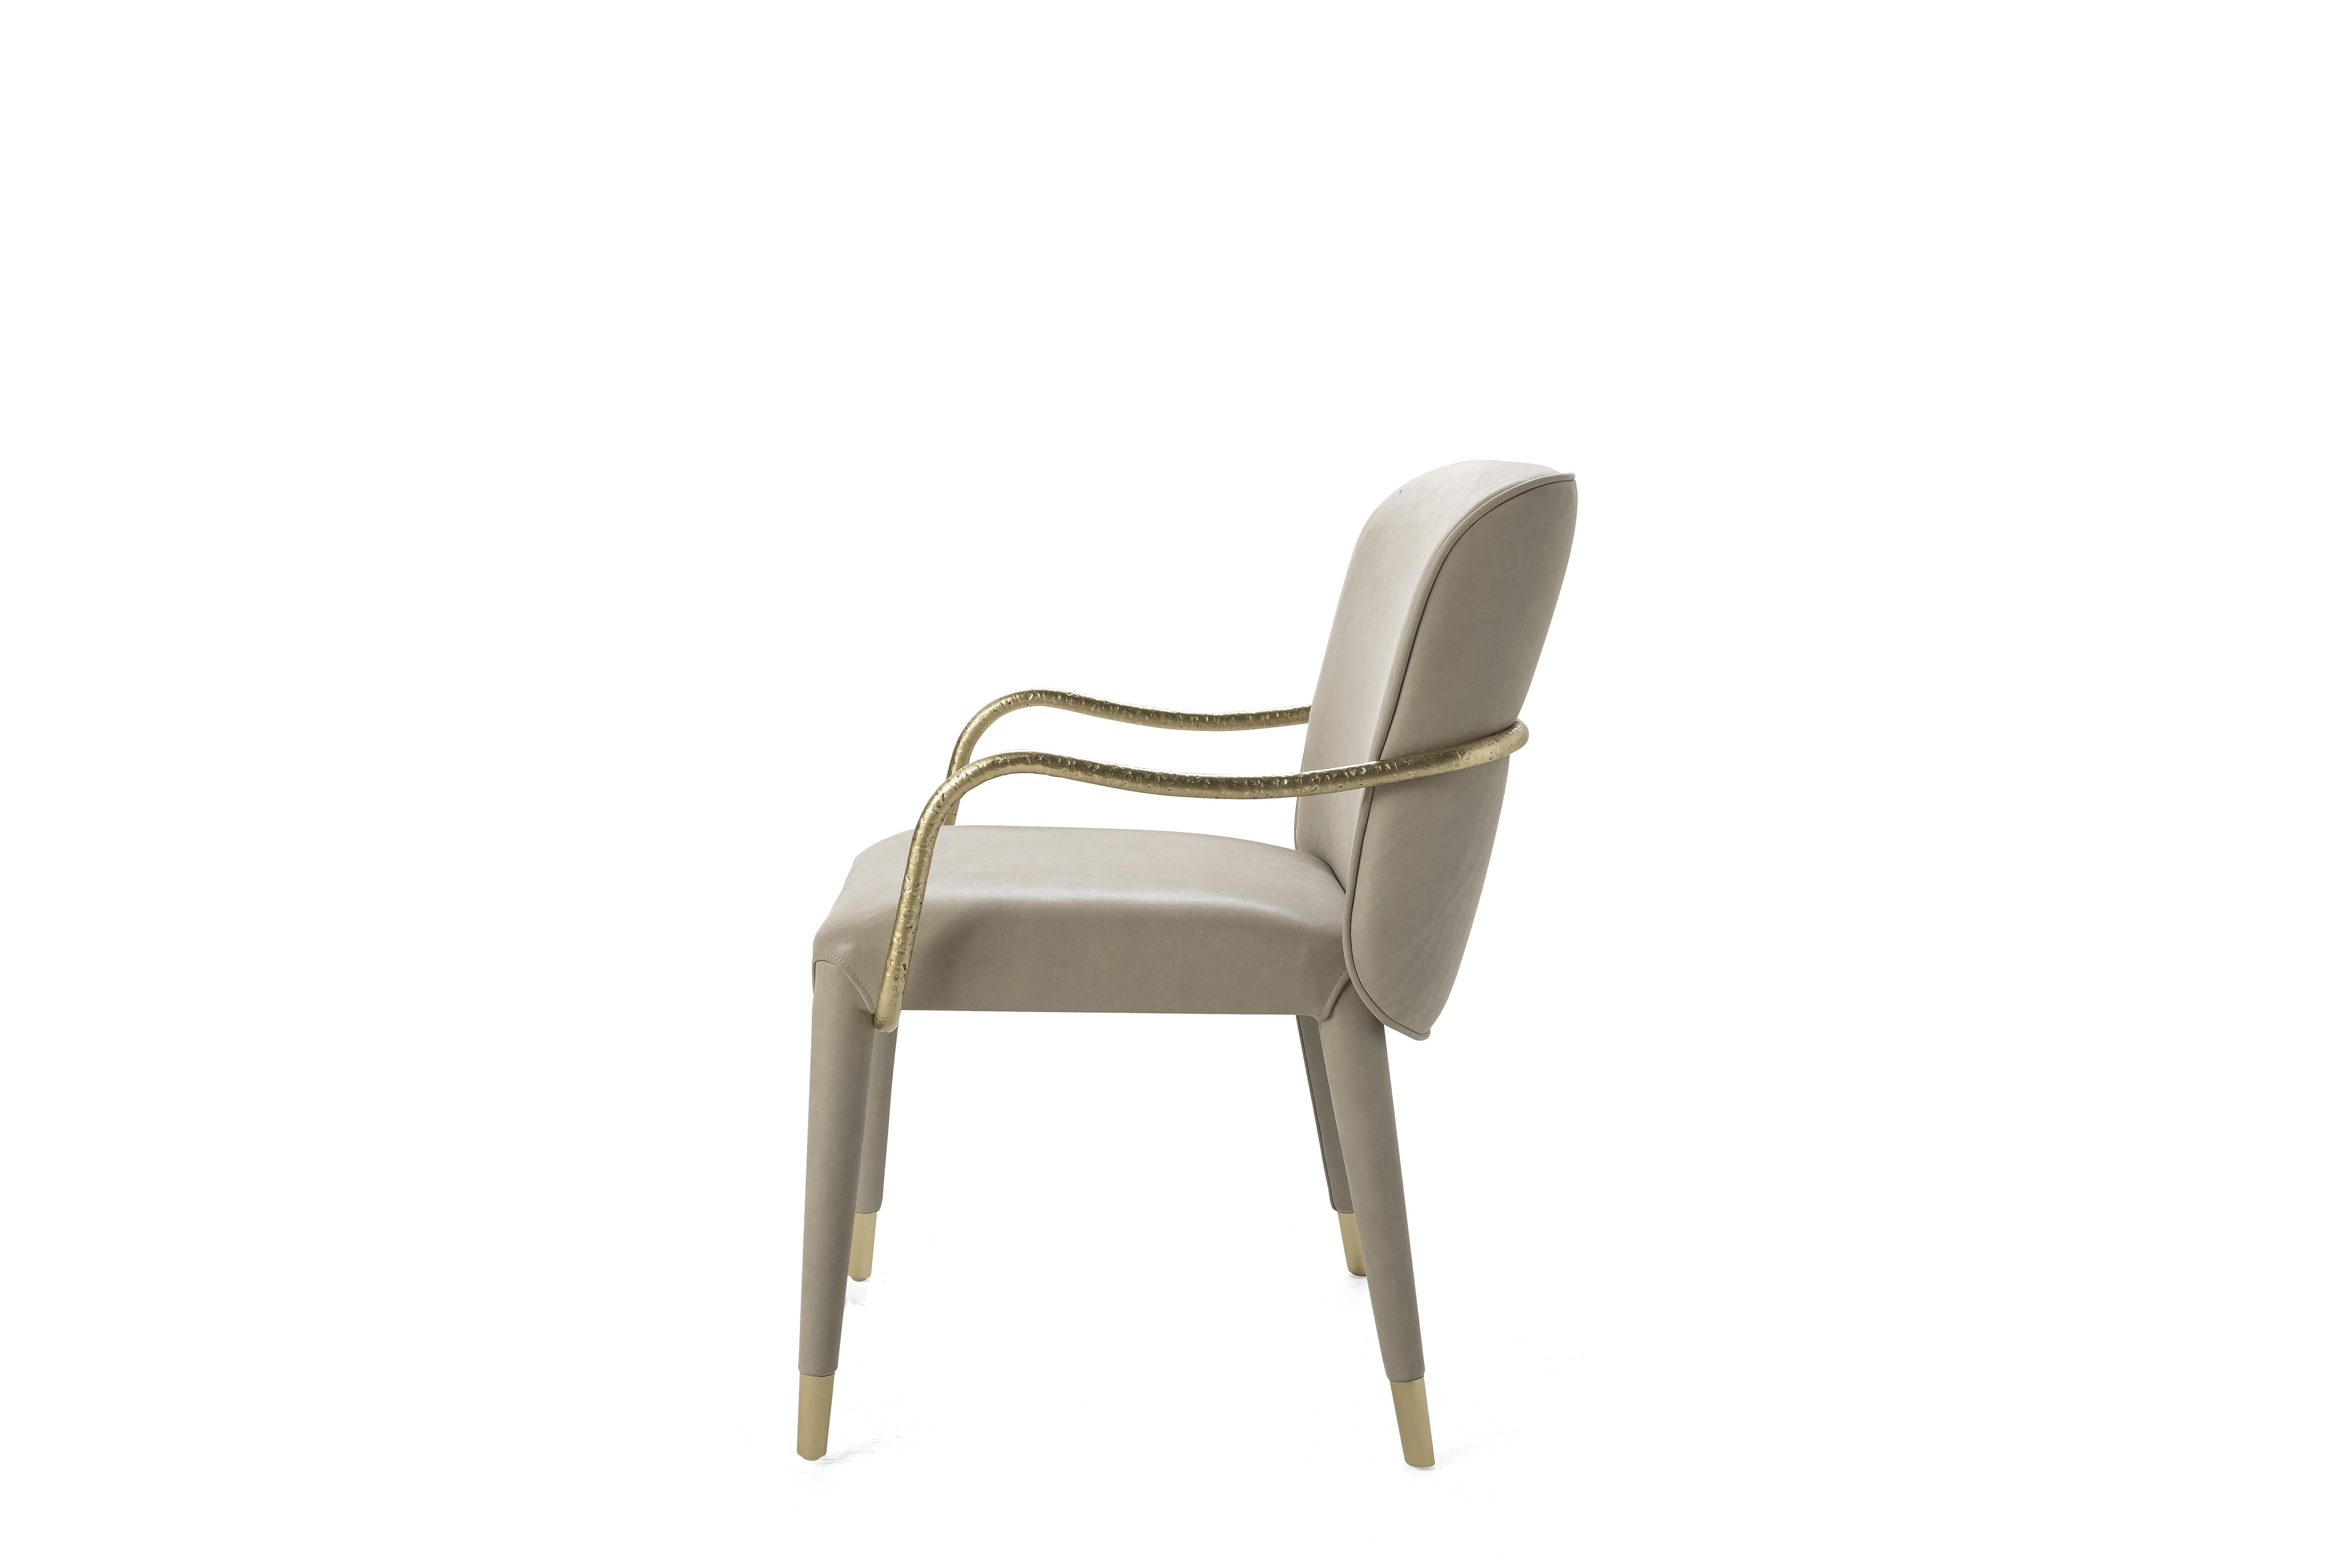 Modern 21st Century Kivu Chair in Leather by Roberto Cavalli Home Interiors For Sale